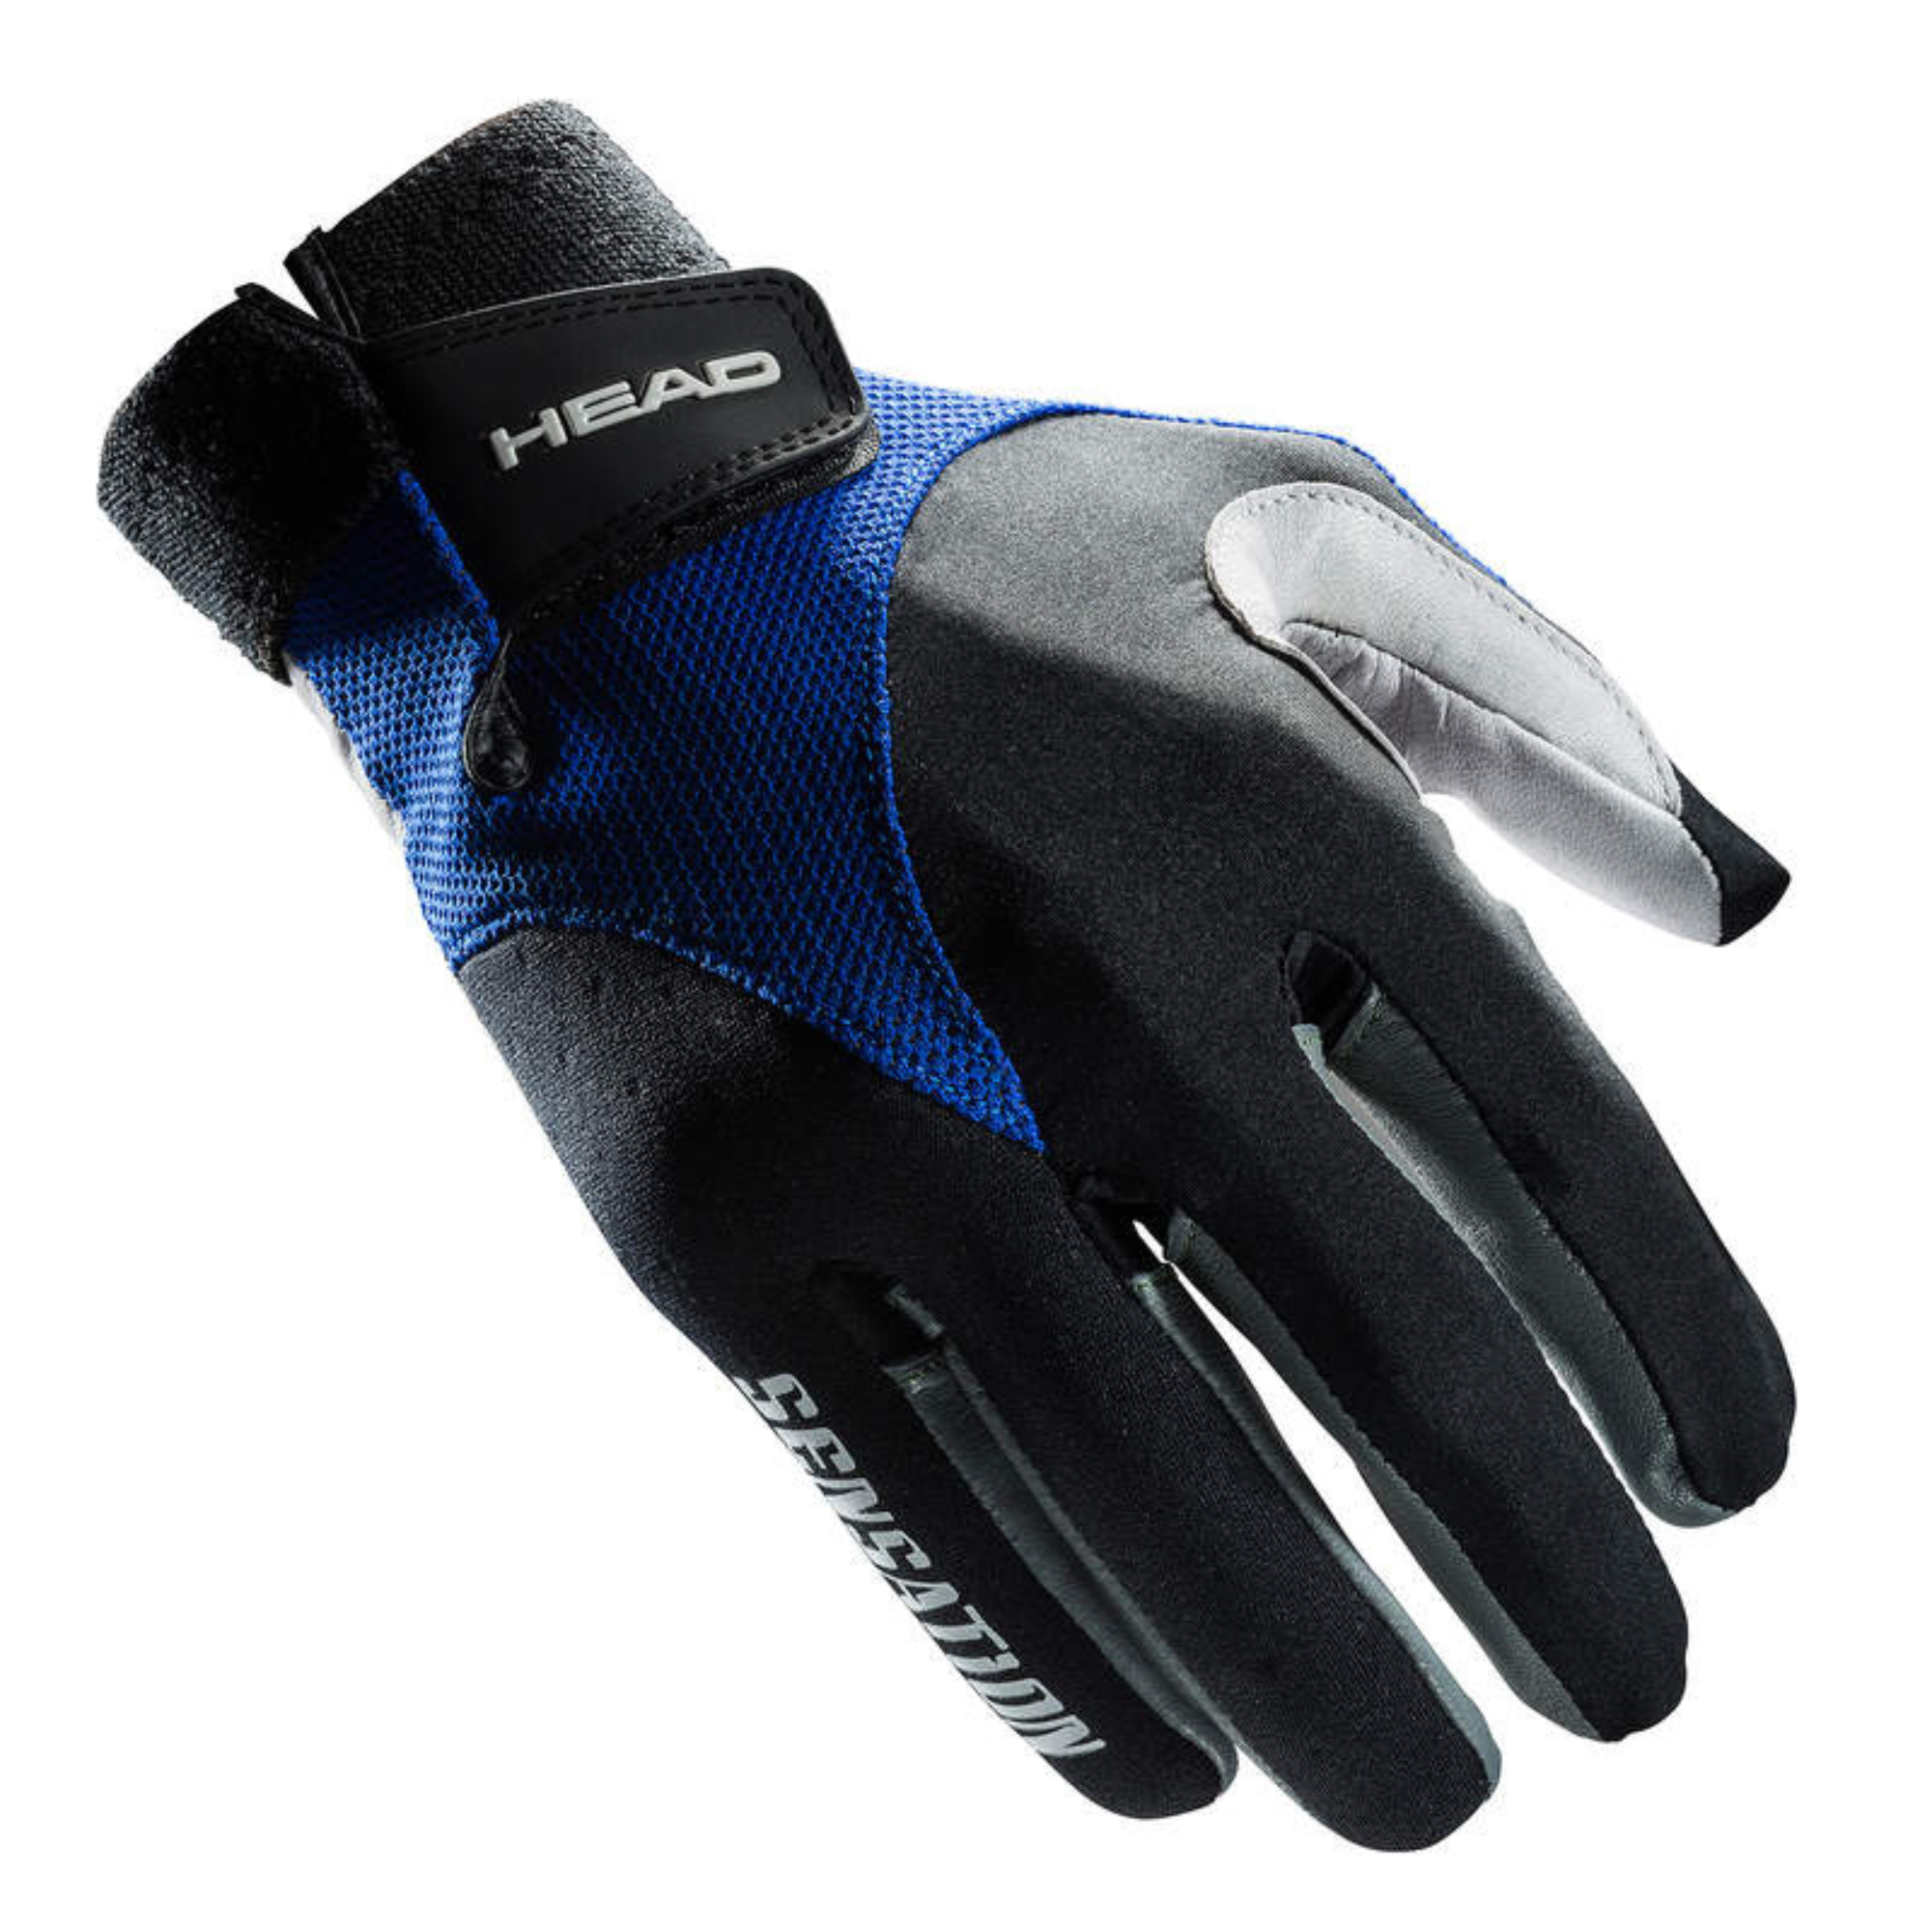 Glove for racquet sports tennis, pickleball, racquetball, padel, and others